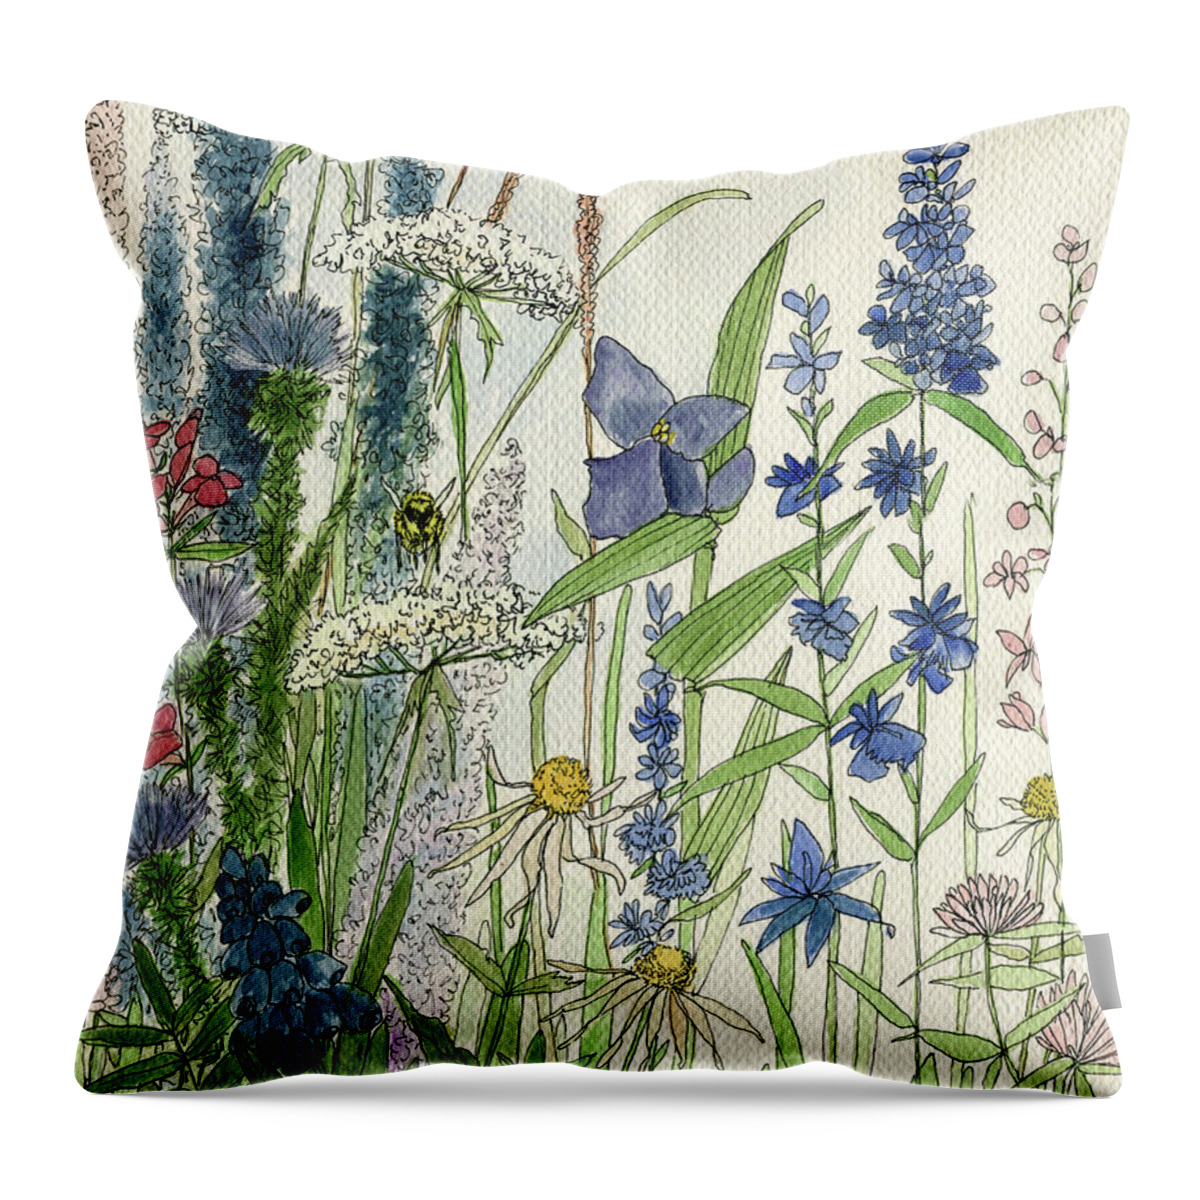 Wildflower Print Throw Pillow featuring the painting Wildflowers by Laurie Rohner